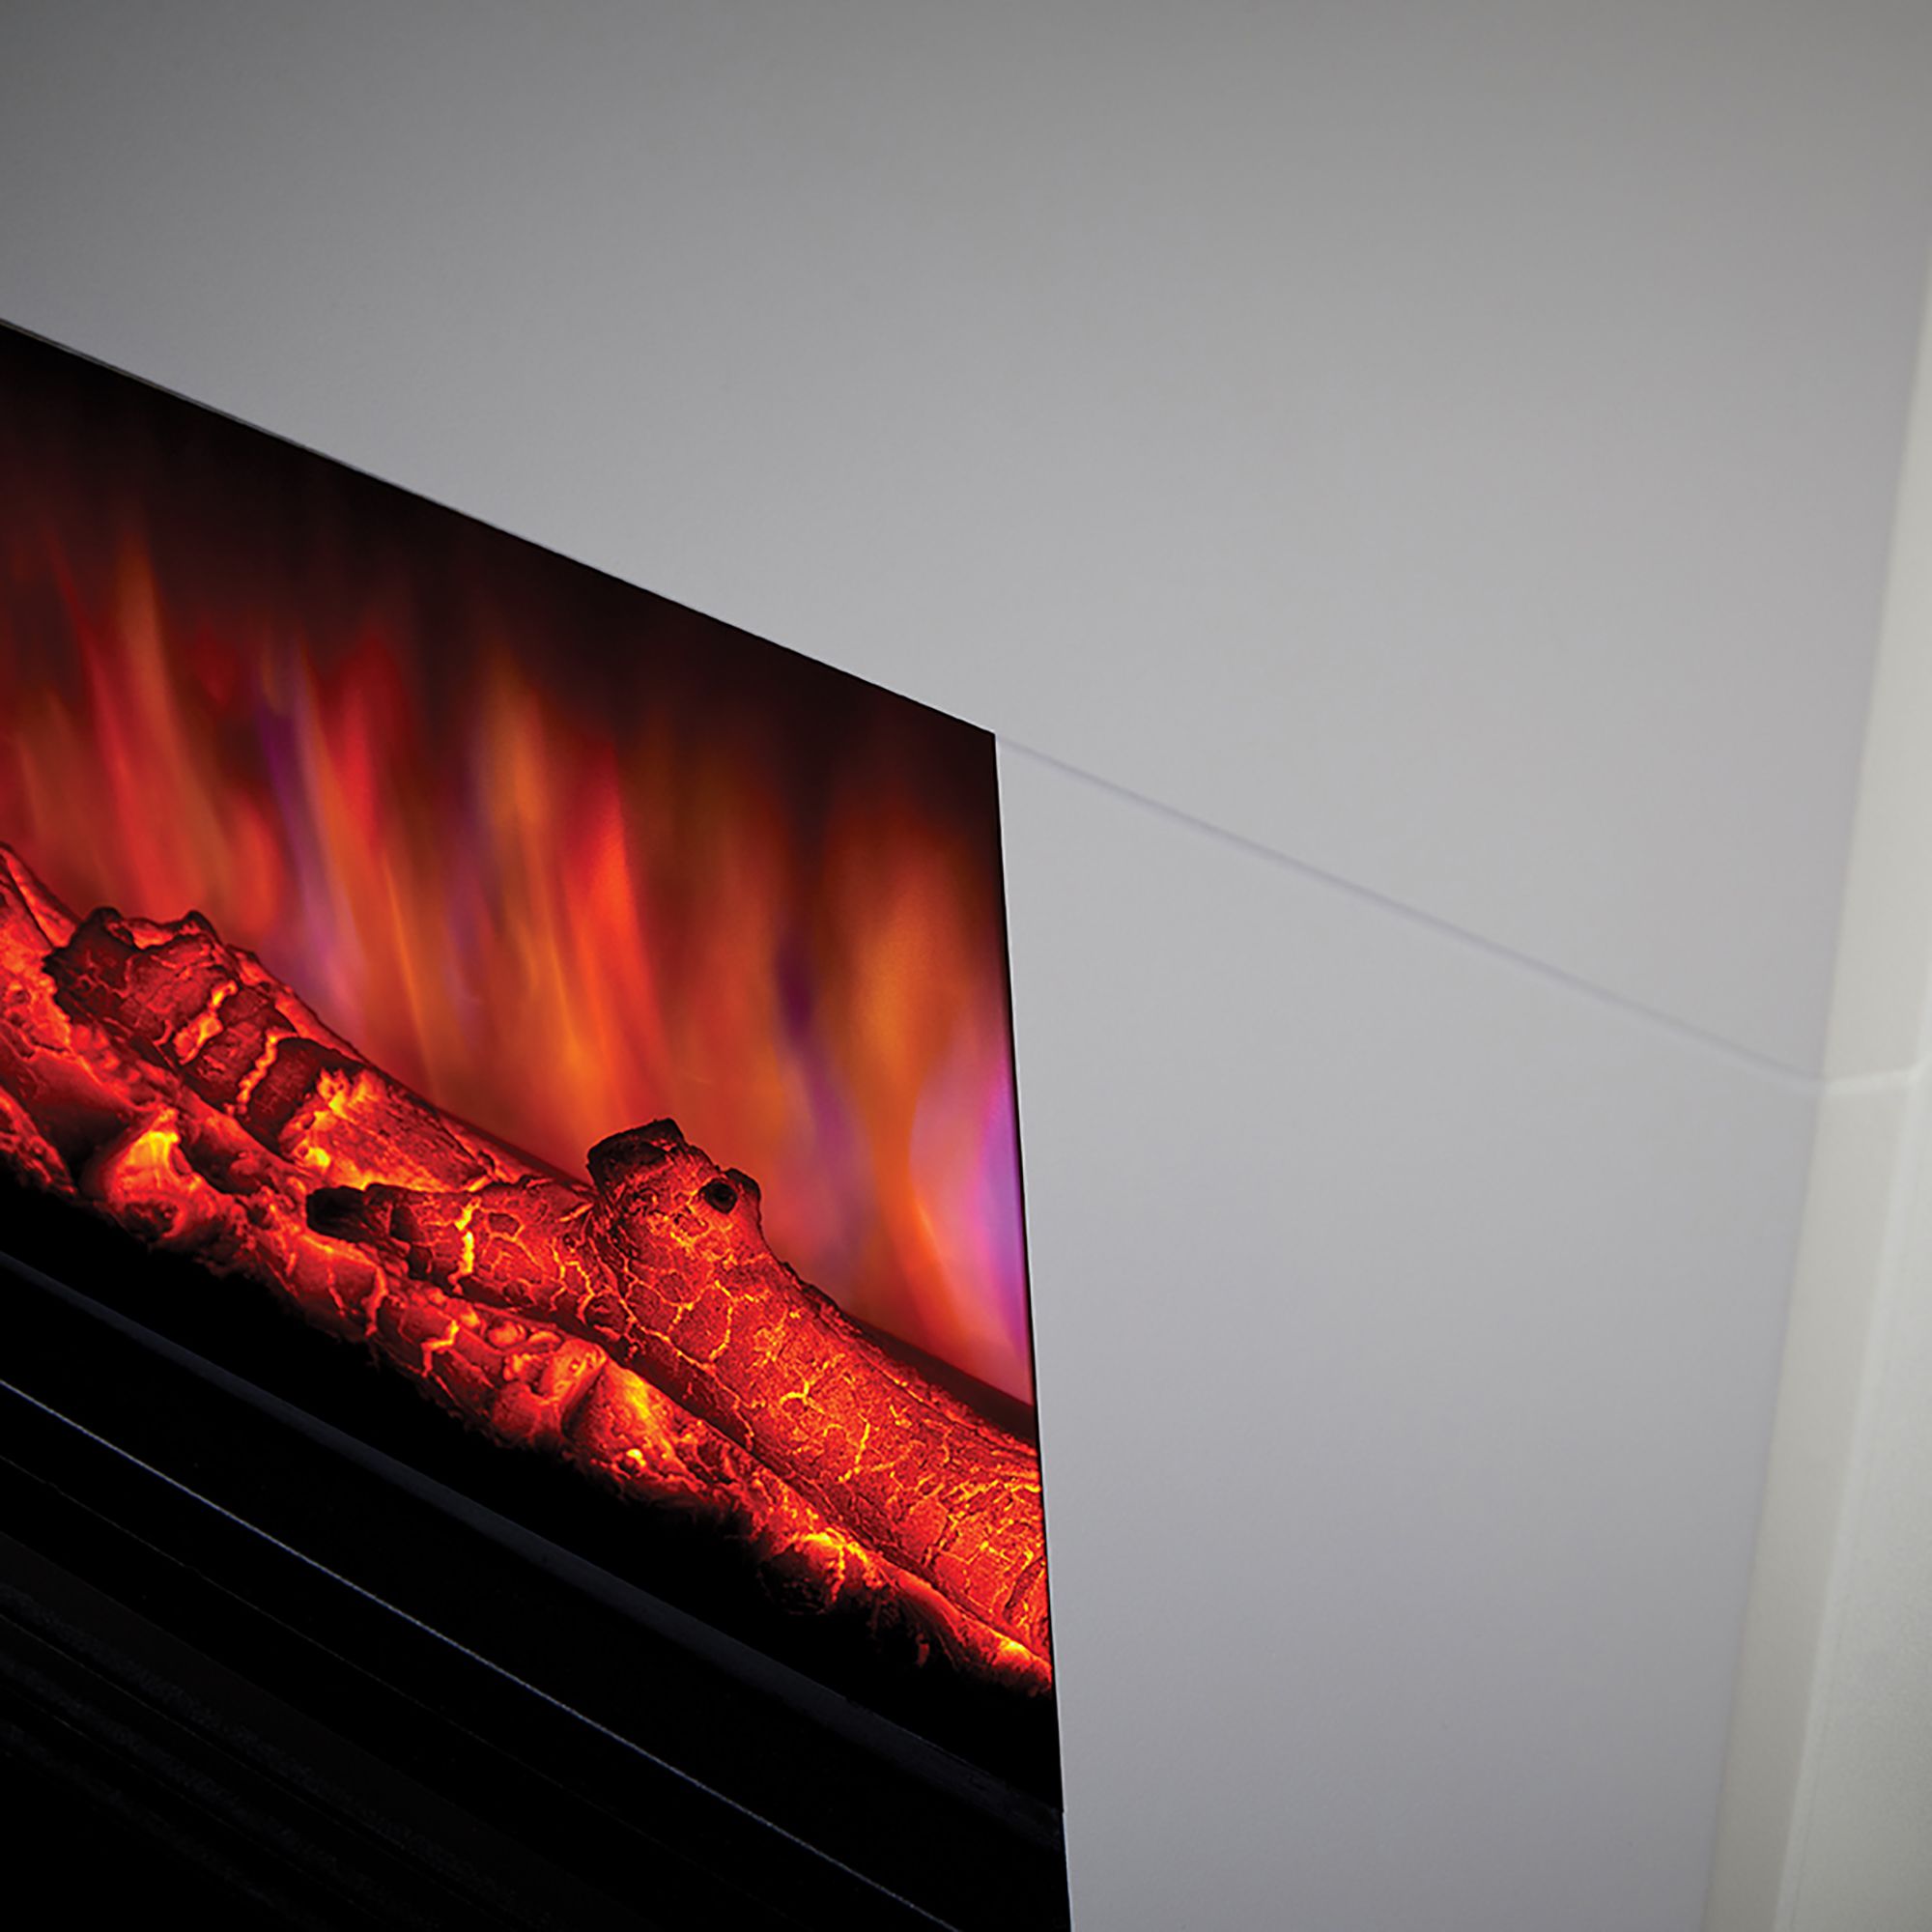 Suncrest Raby White MDF & stainless steel Freestanding Electric fire suite